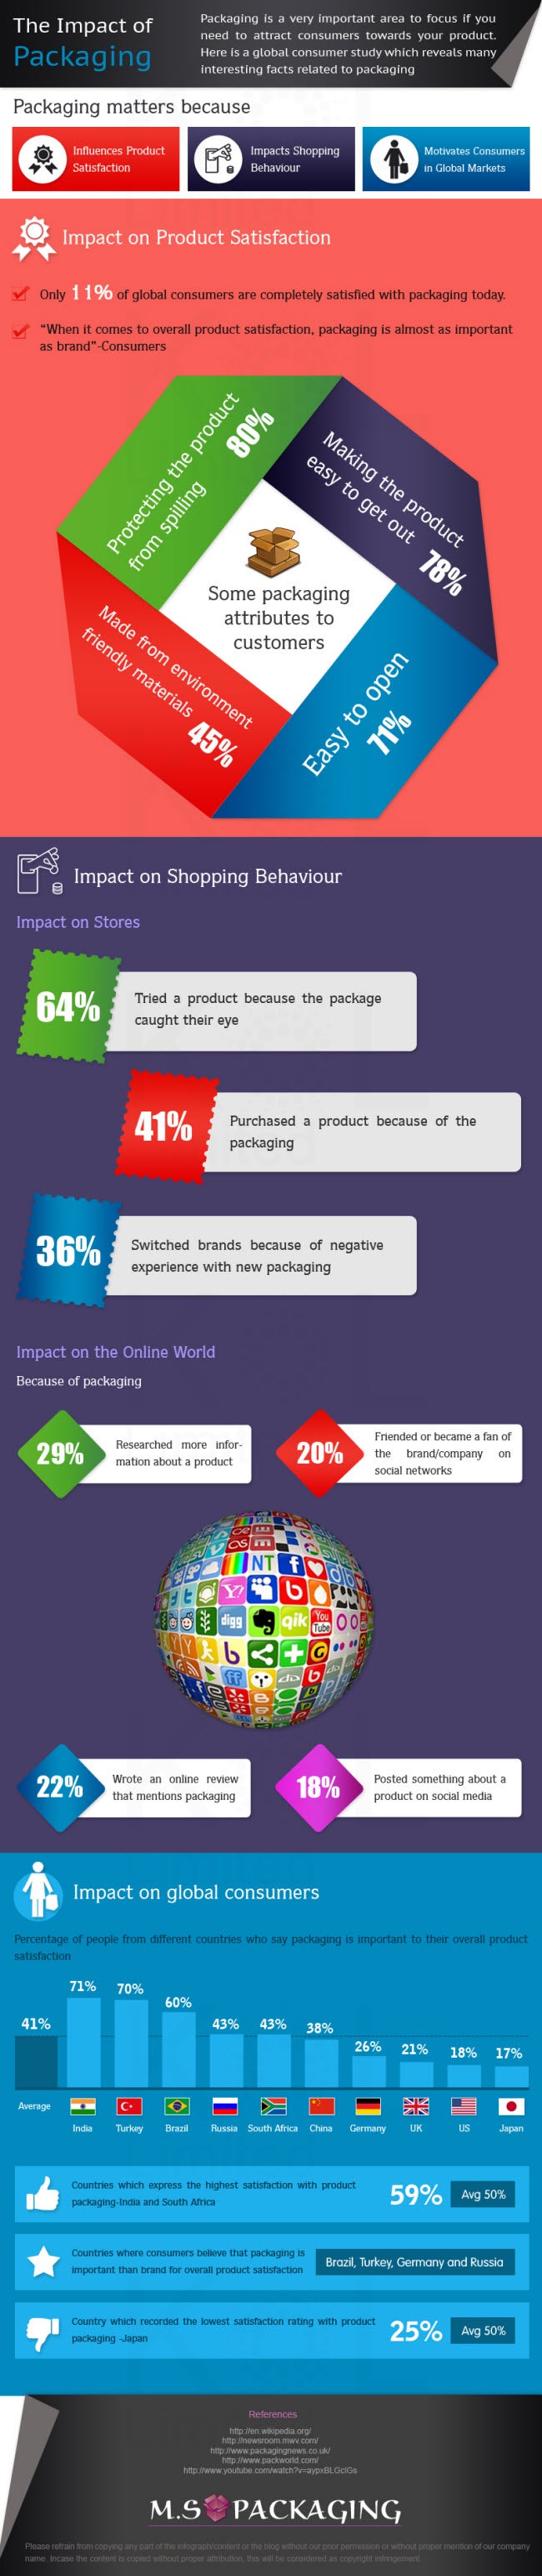 The Impact Of Packaging On Marketing And